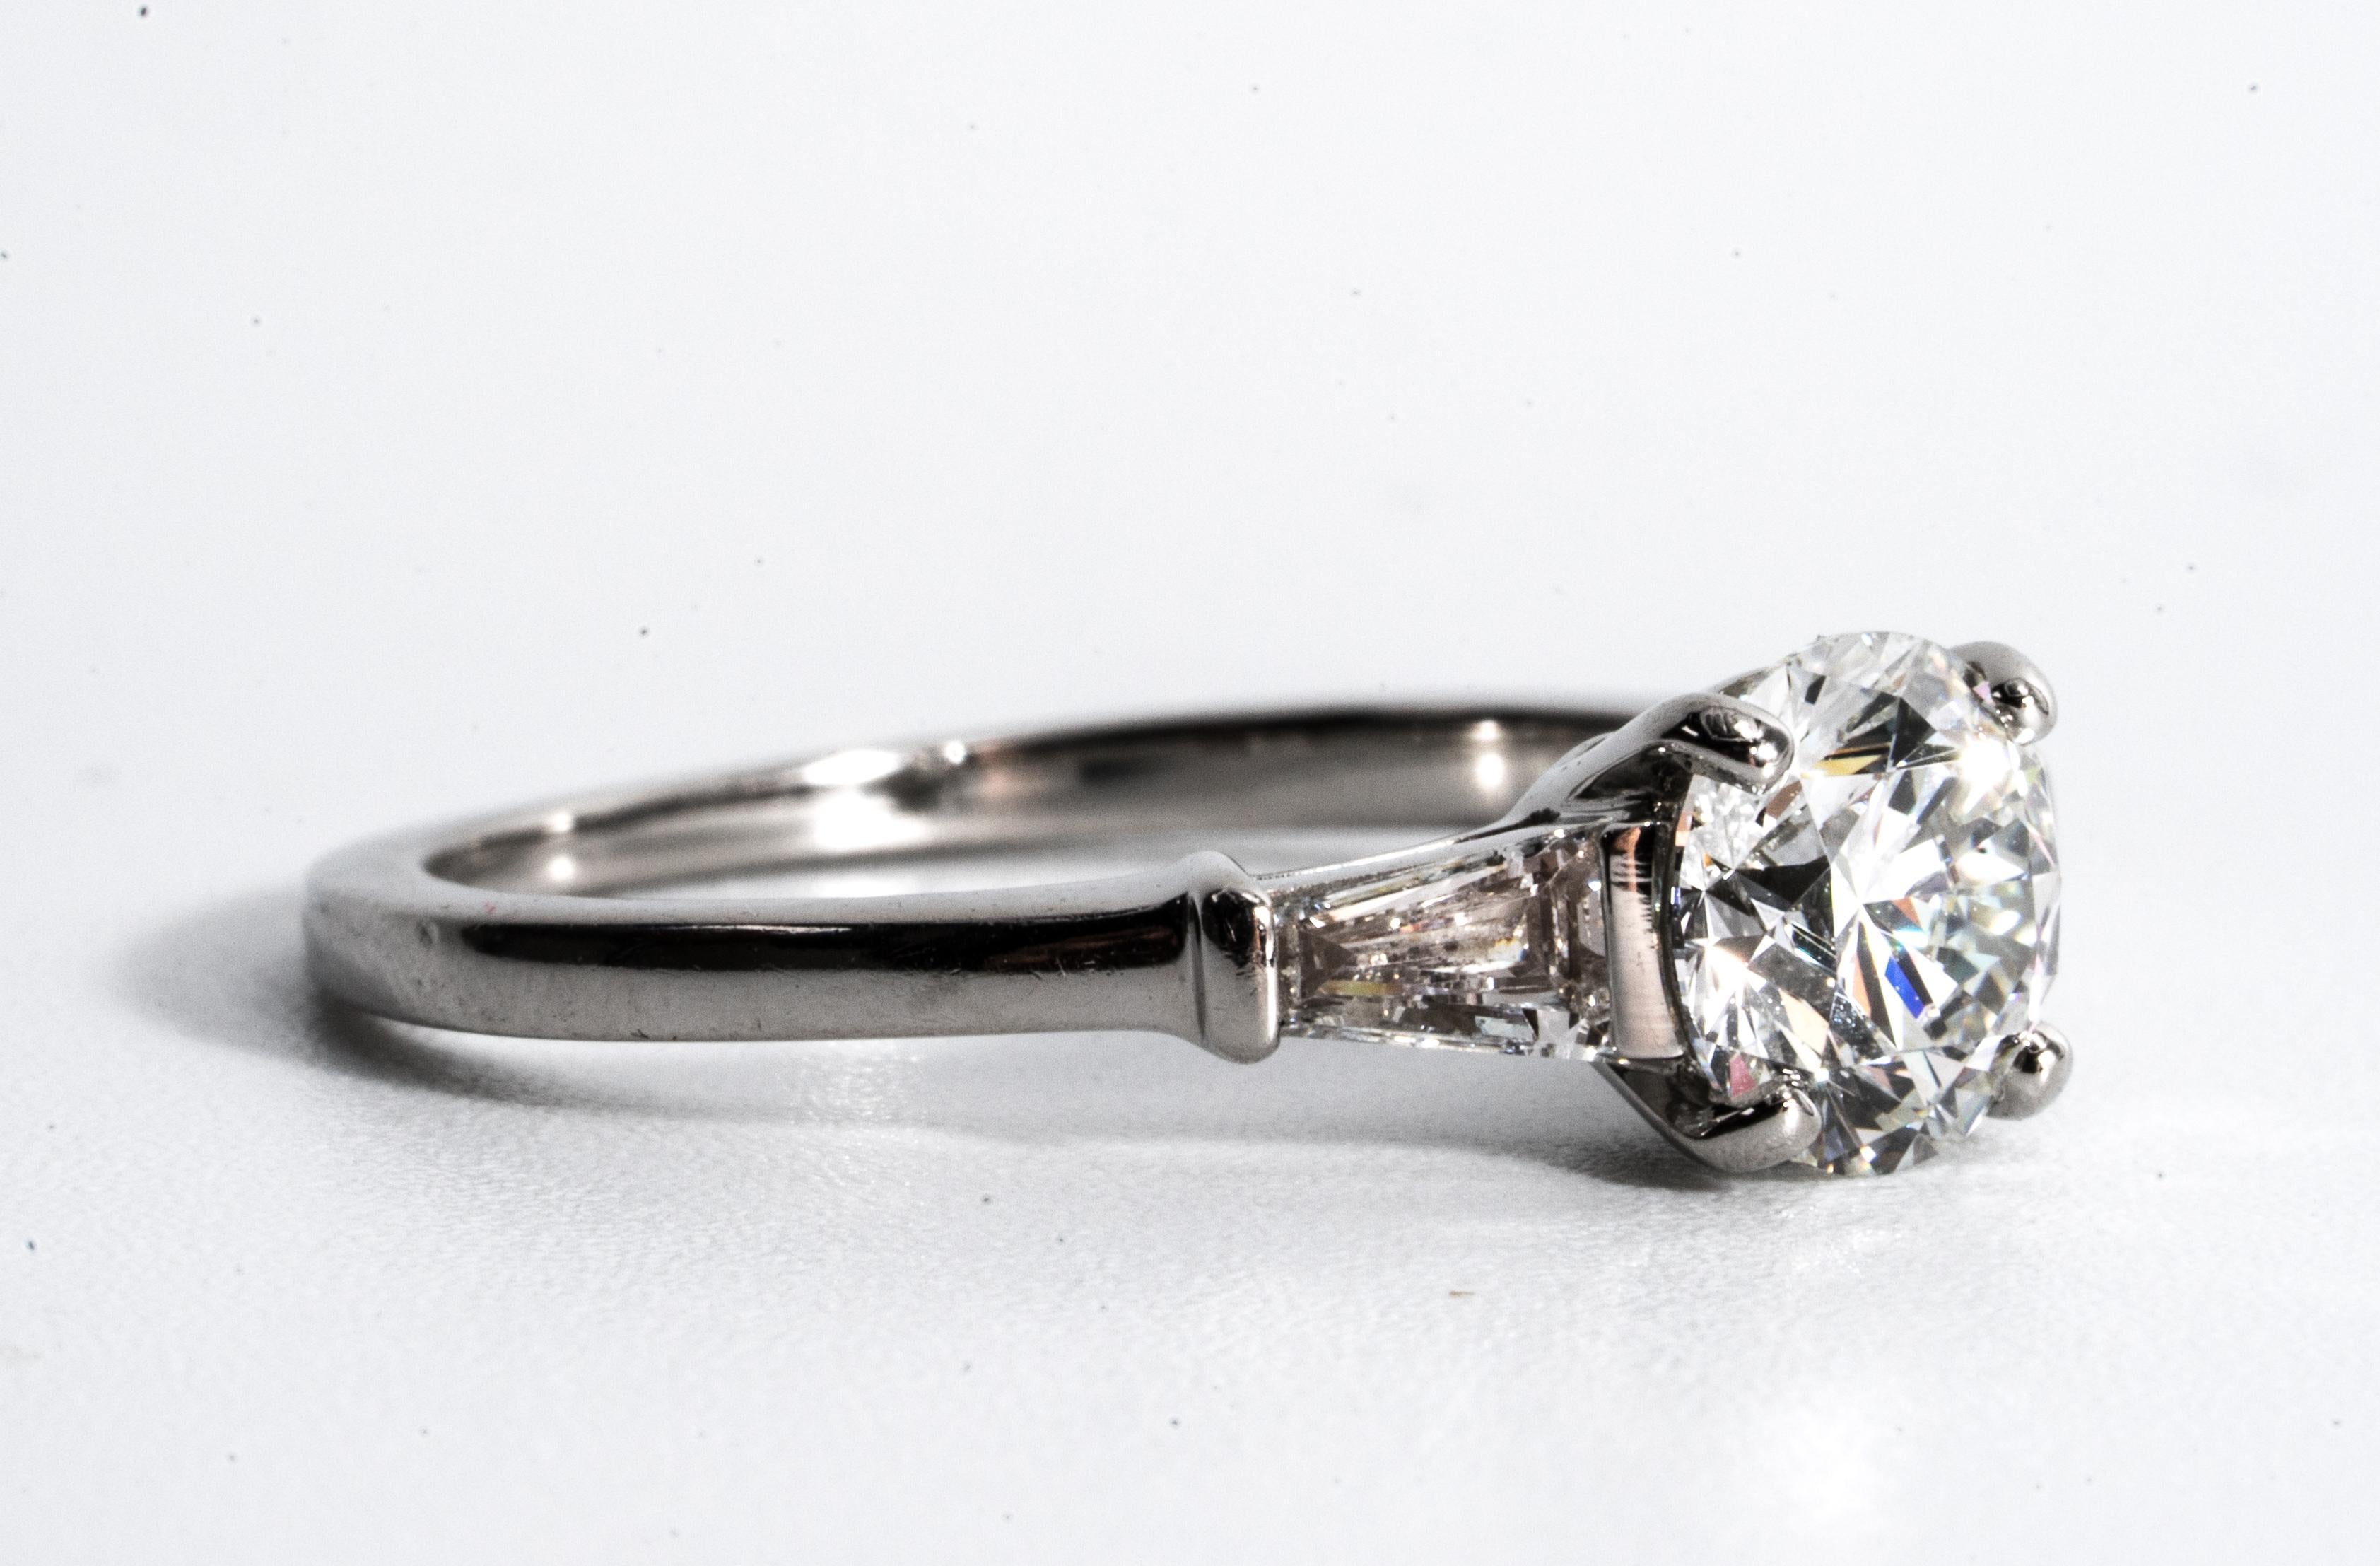 Bulgari Platinum Diamond Engagement Ring  flanked by two tapered Baguettes signed by Bulgari featuring a 1.01 ct Center, graded G color , and VVS1 Clarity.

Center: 1.01 G VVS1 
Sides: .35 Carats total tapered Baguettes - F-G VVS 

Ring is currently